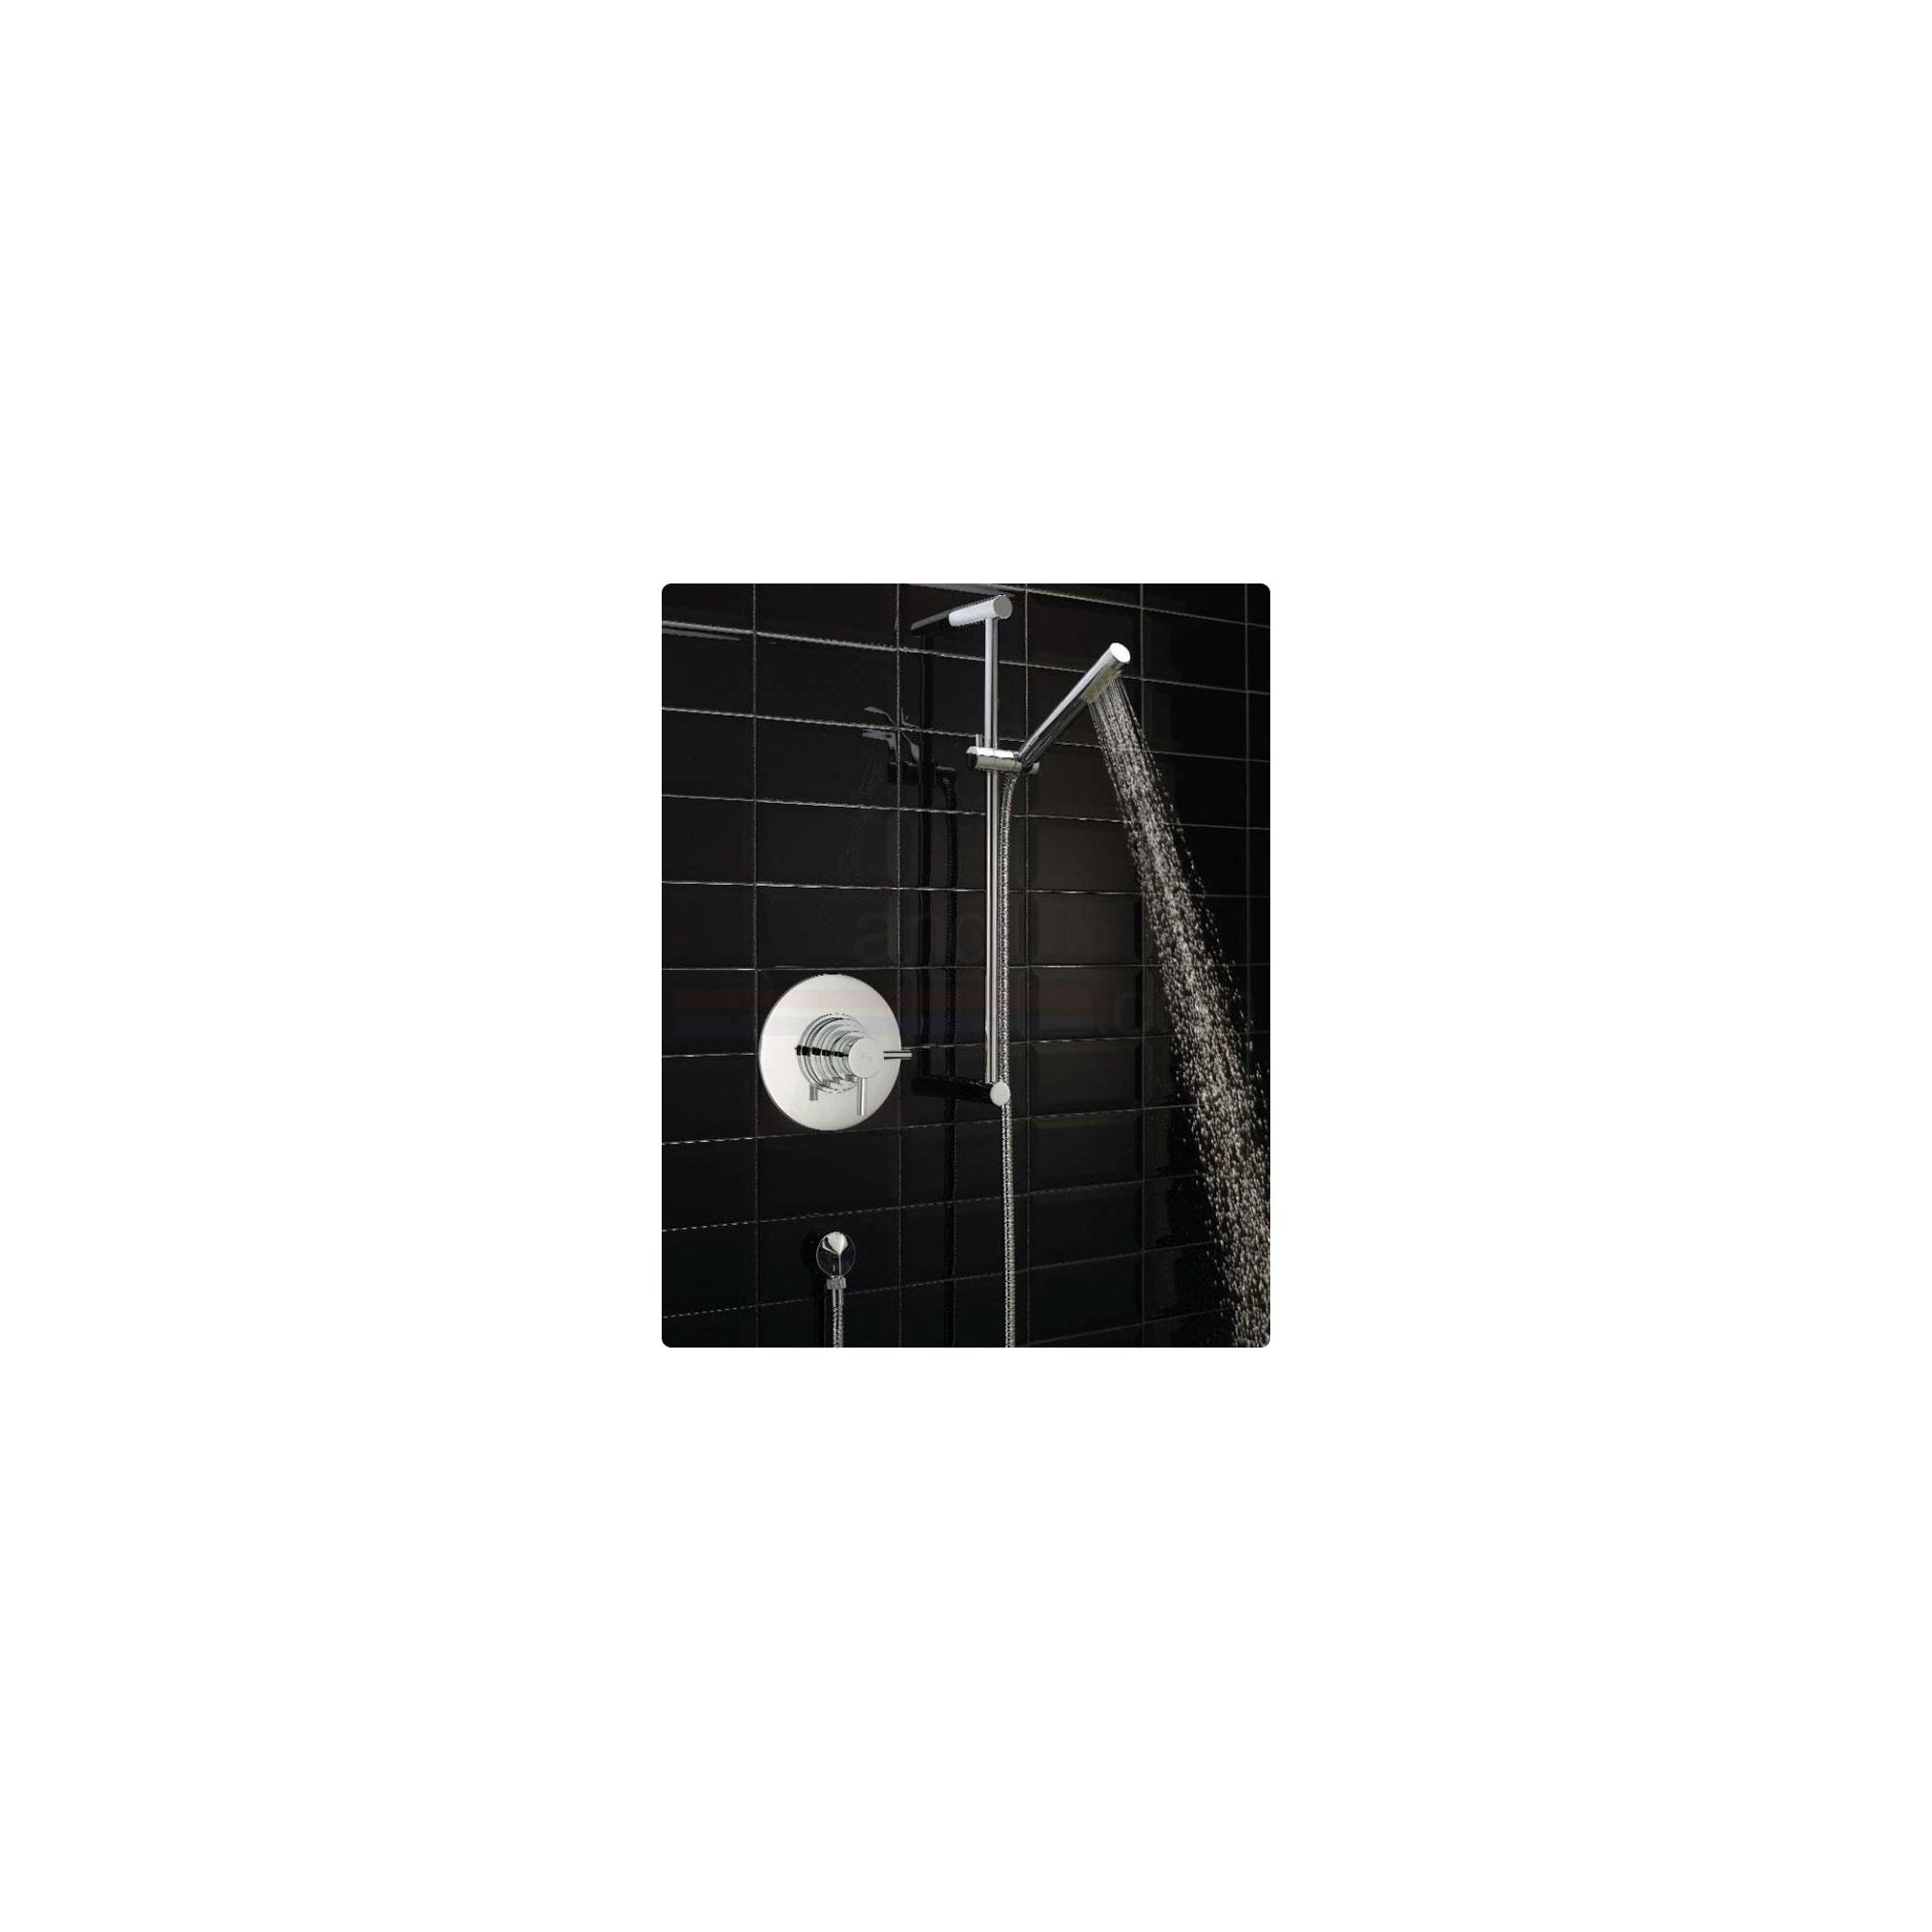 Hudson Reed Tec Dual Complete Thermostatic Mixer Shower at Tesco Direct